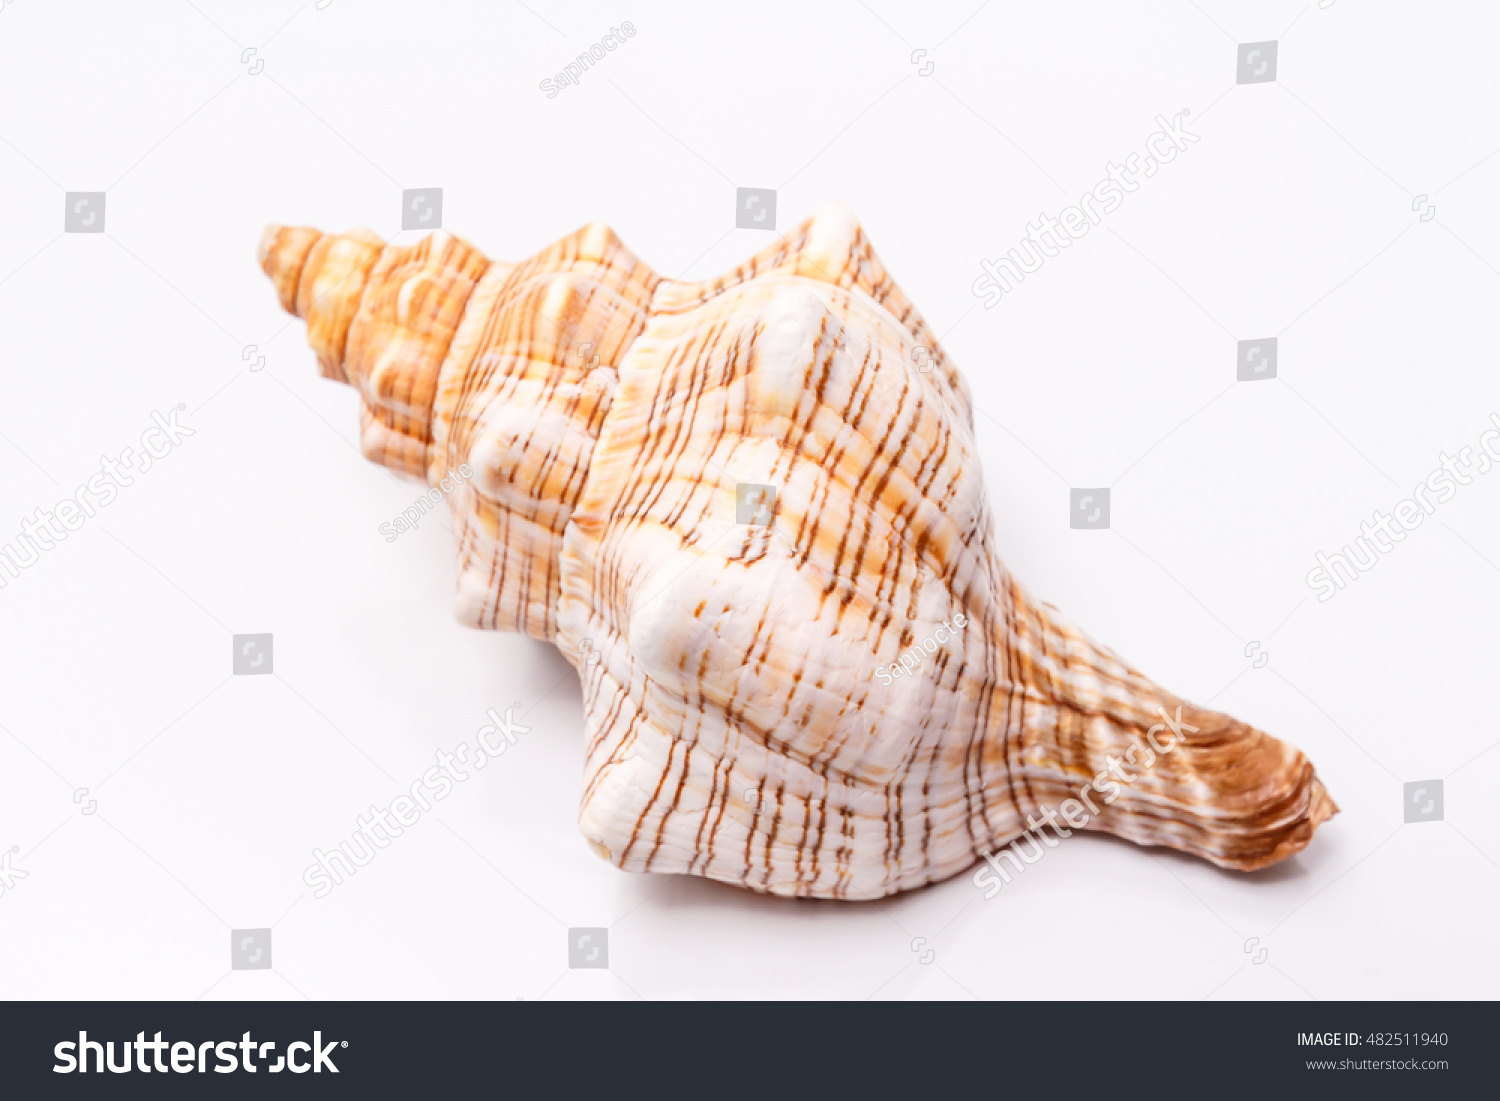 Sea shell on a white background #482511940